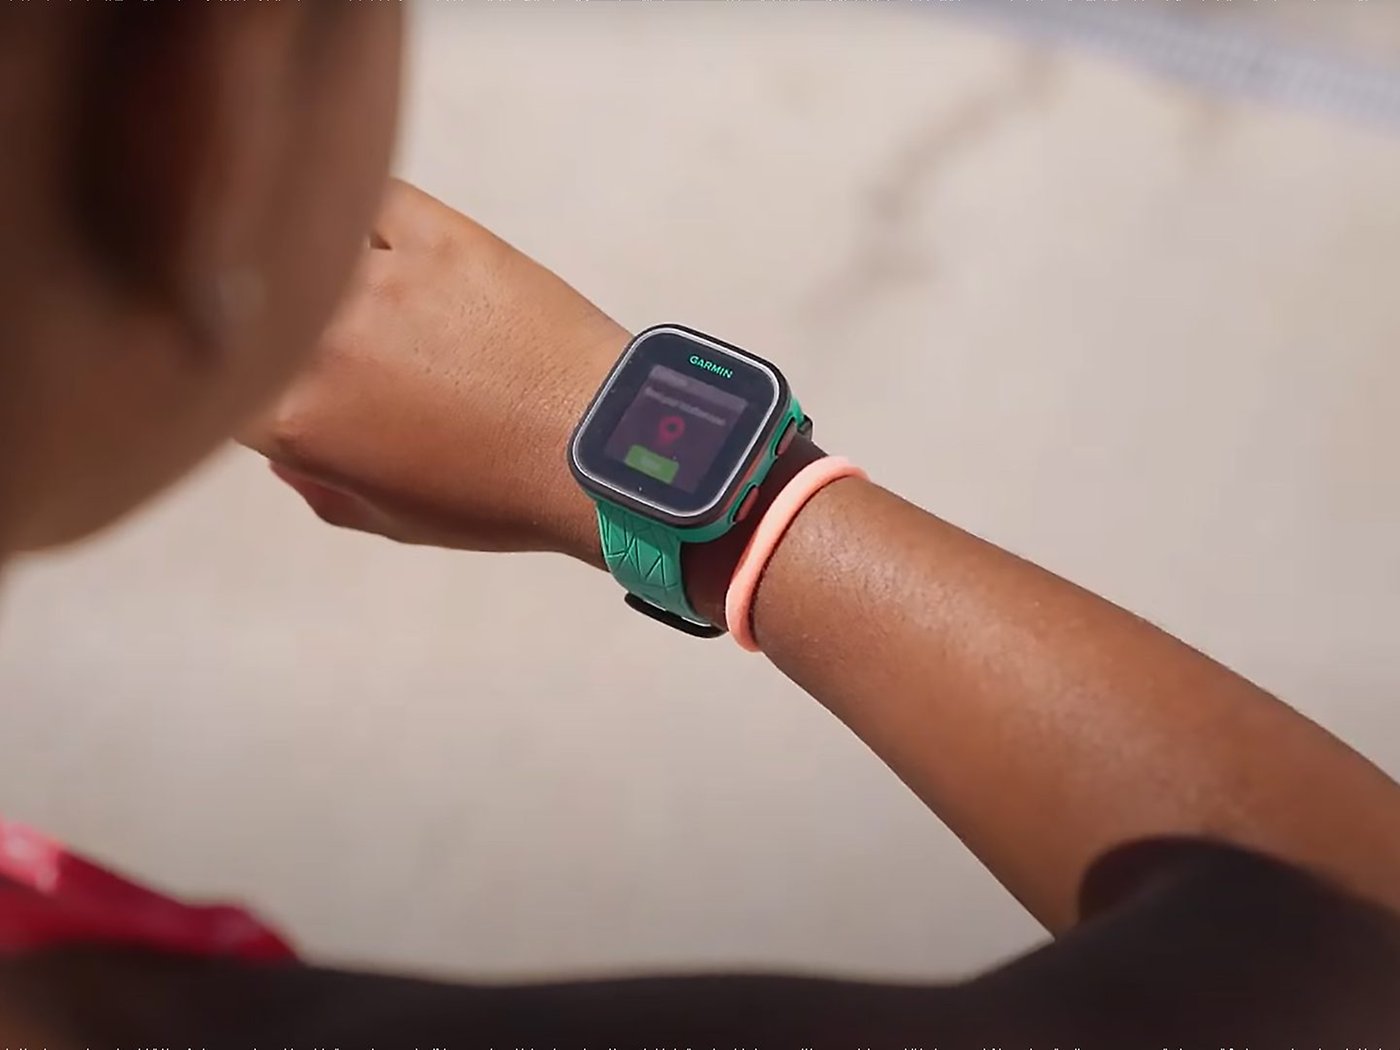 Garmin Bounce is an LTE kids' smartwatch with real-time location tracking